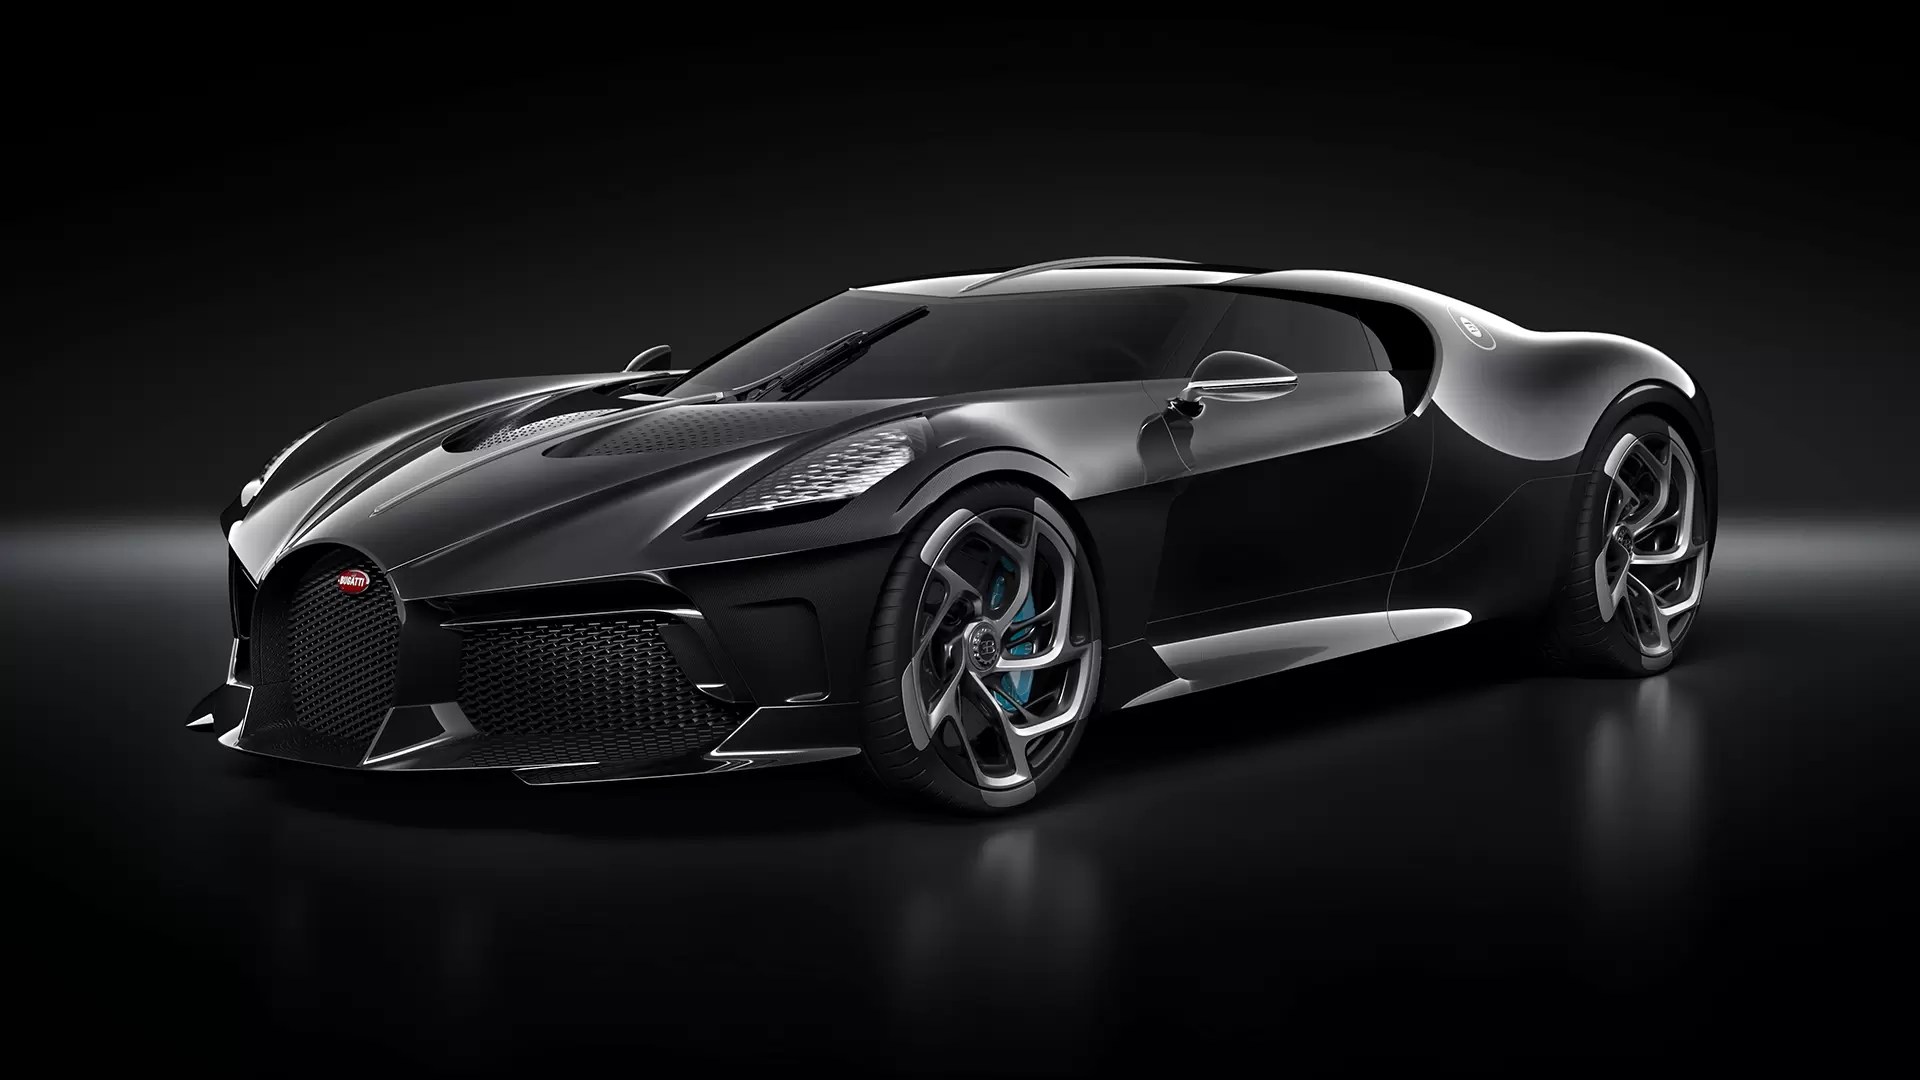 The La Voiture Noire one-off is the world's most expensive production car.